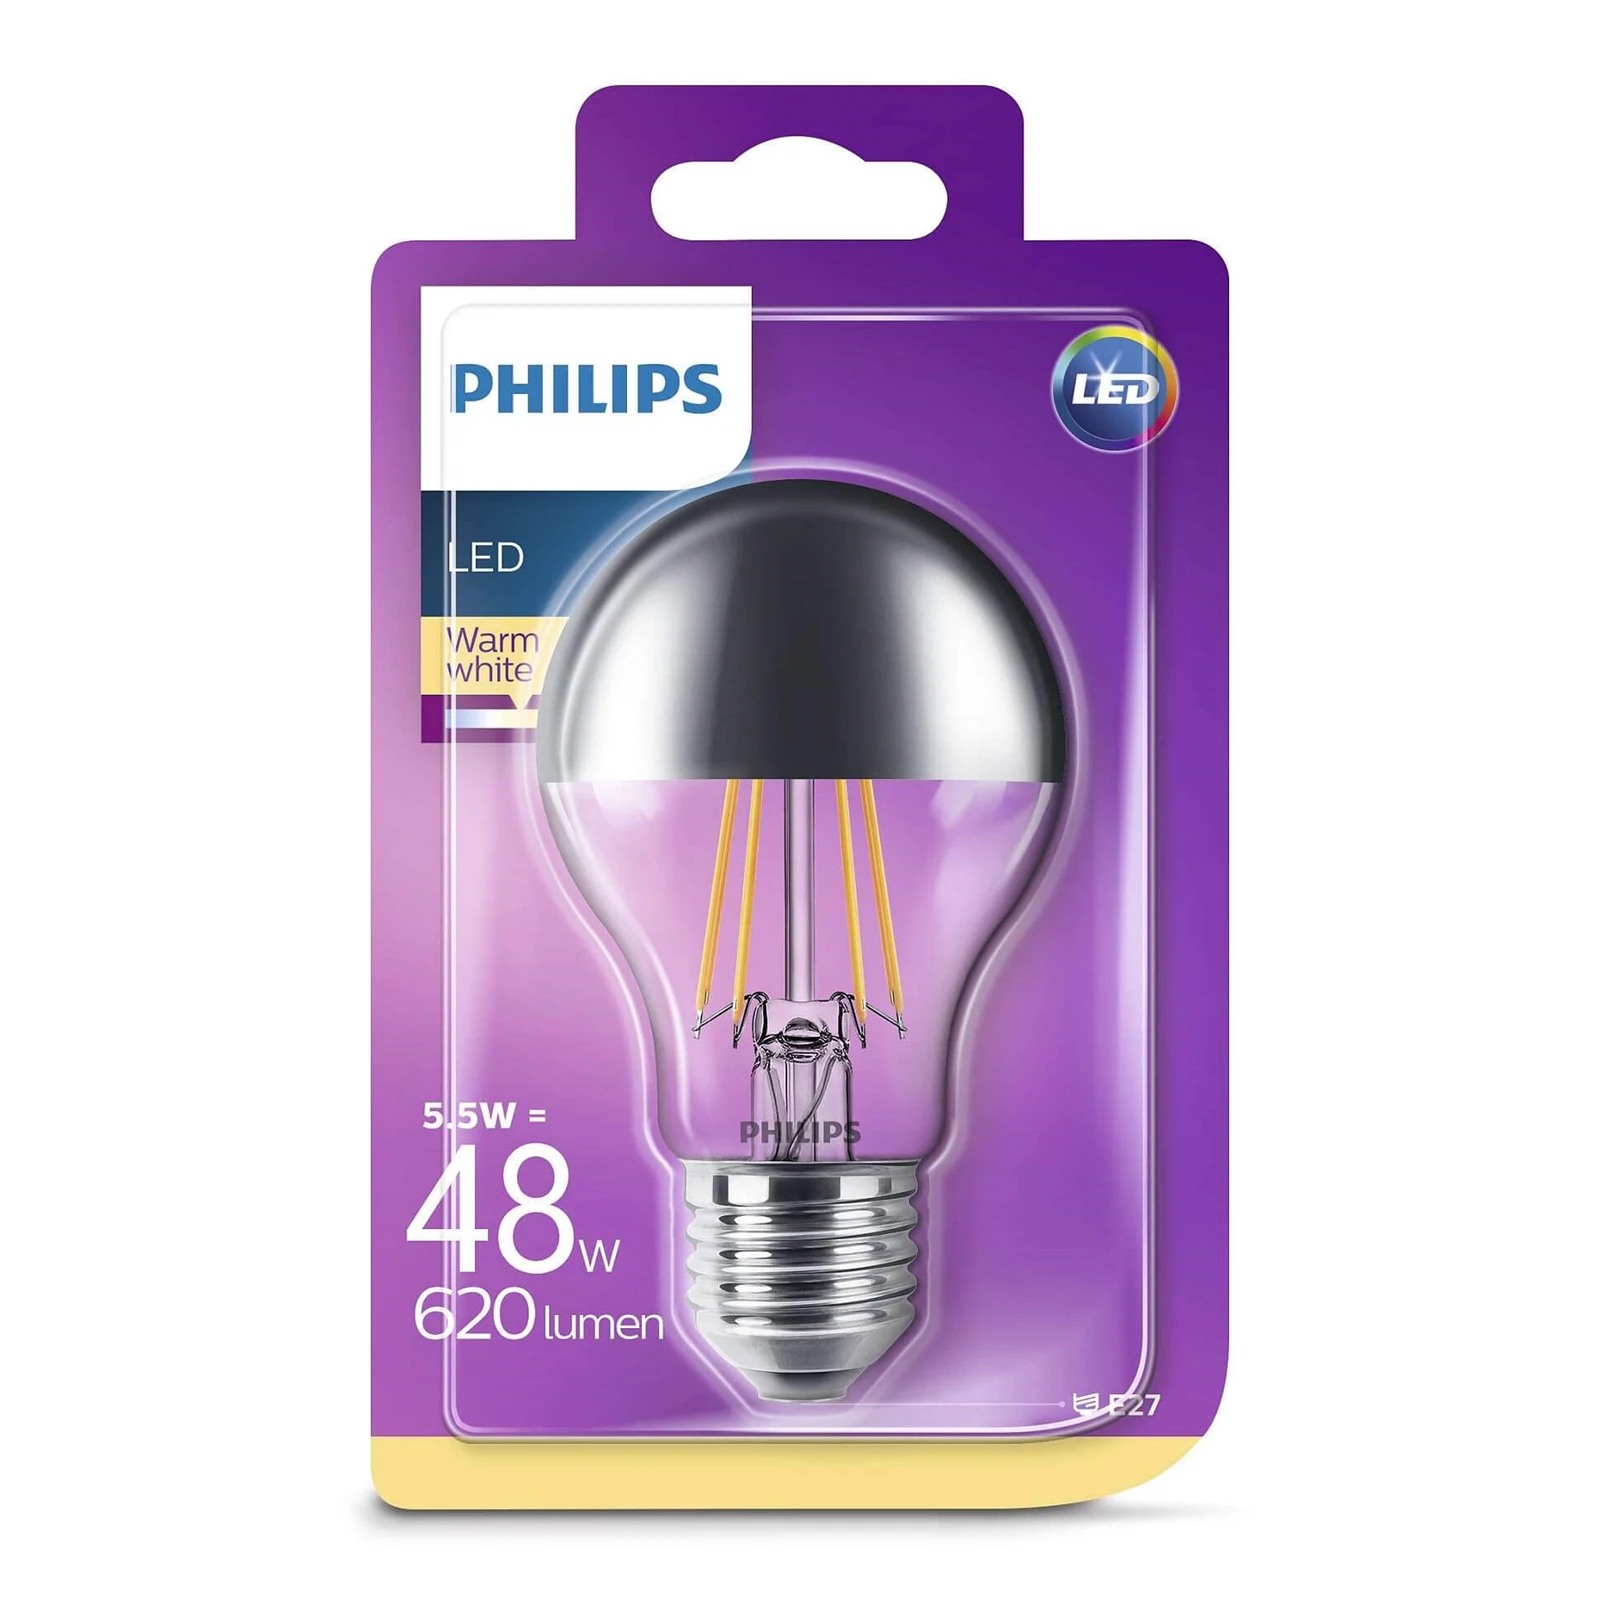 LED 7,2W Filament (650lm) E27 - Philips - Buy online